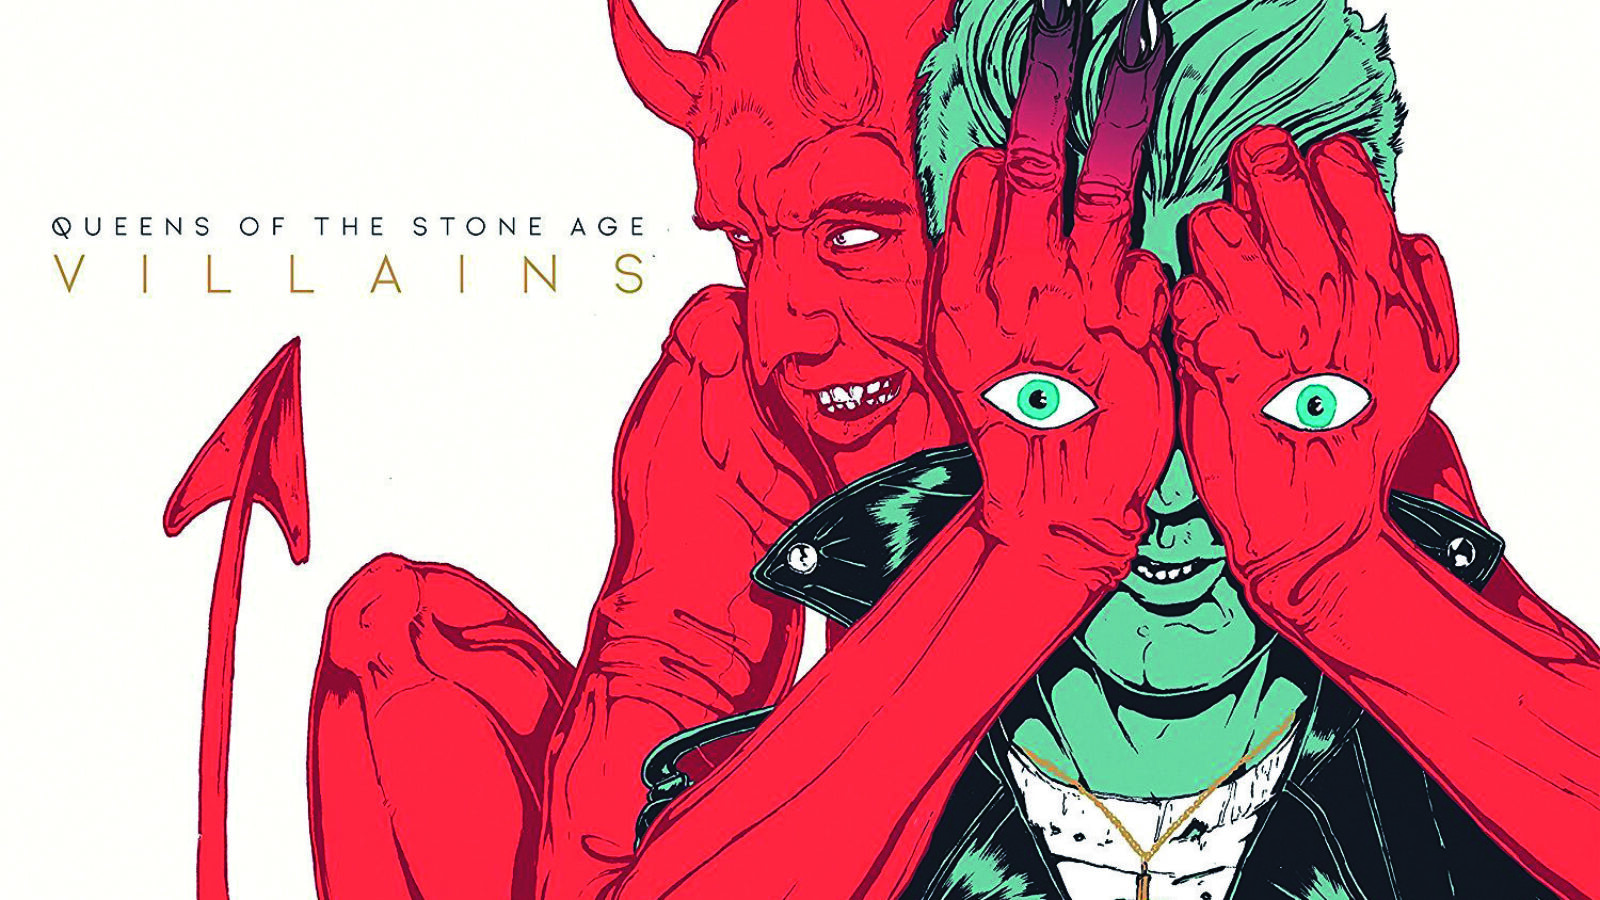 QUEENS OF THE STONE AGE – Villains